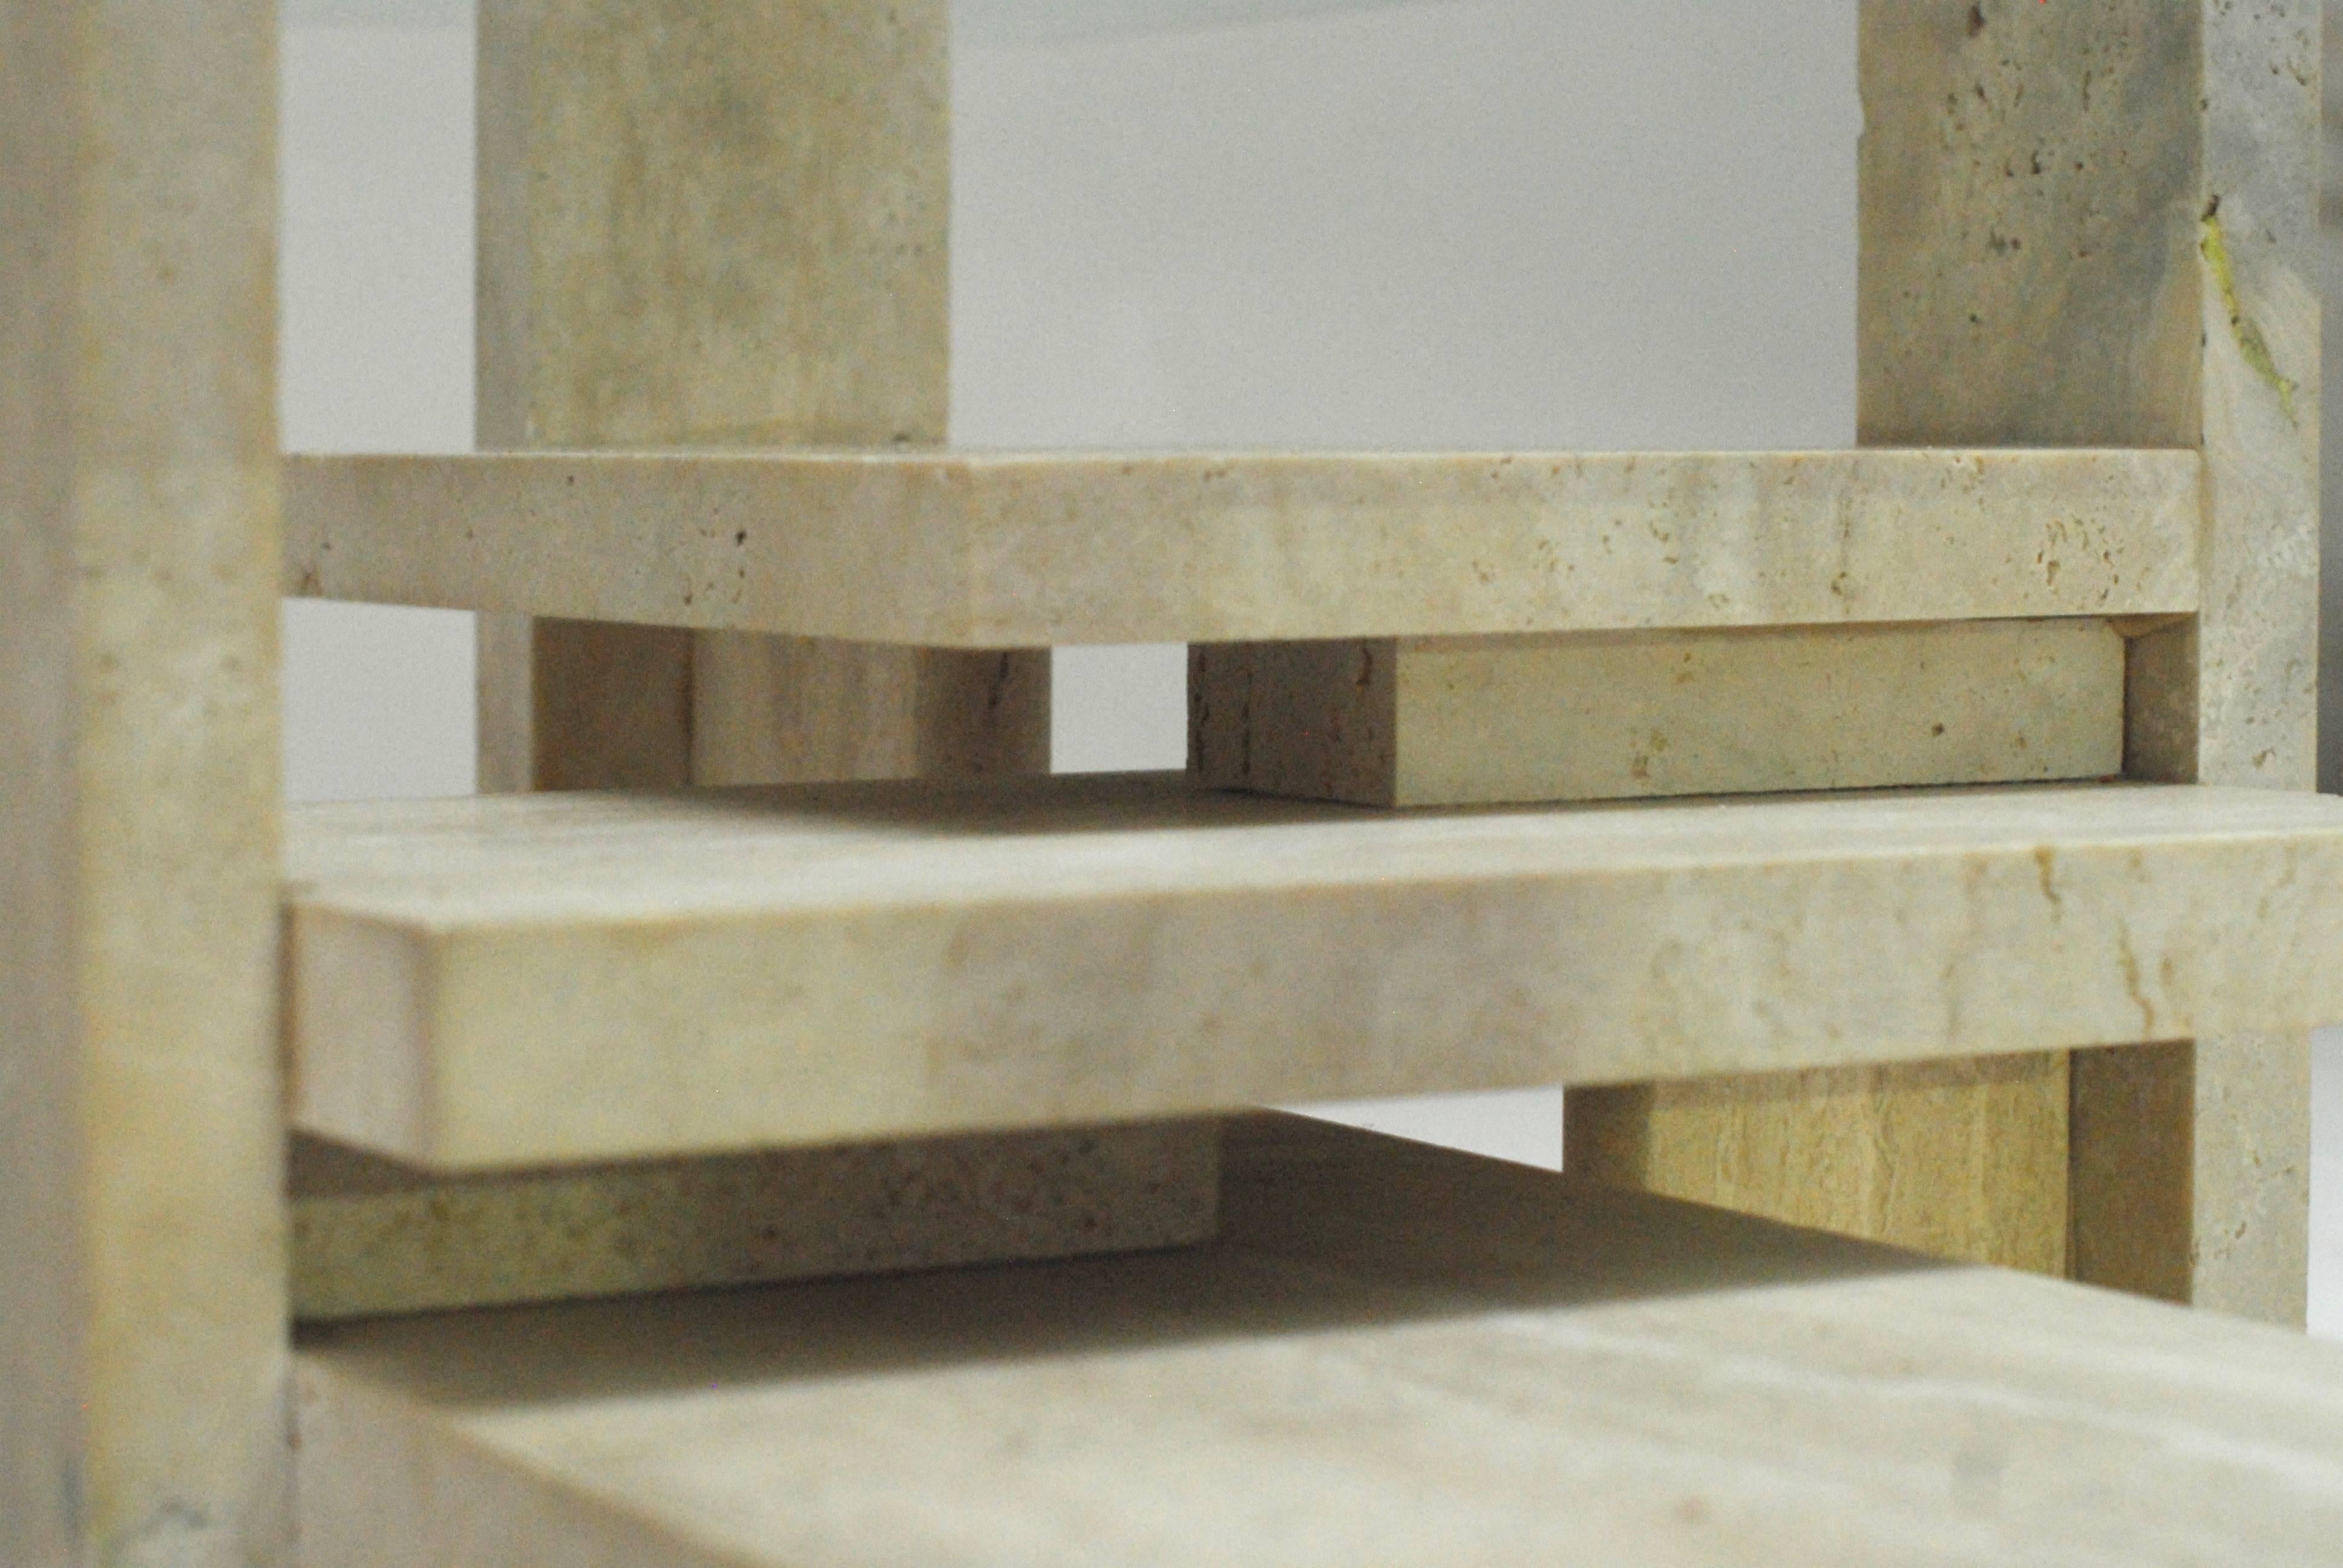 Constructivist Travertine Coffee Table In Excellent Condition For Sale In Antwerp, BE